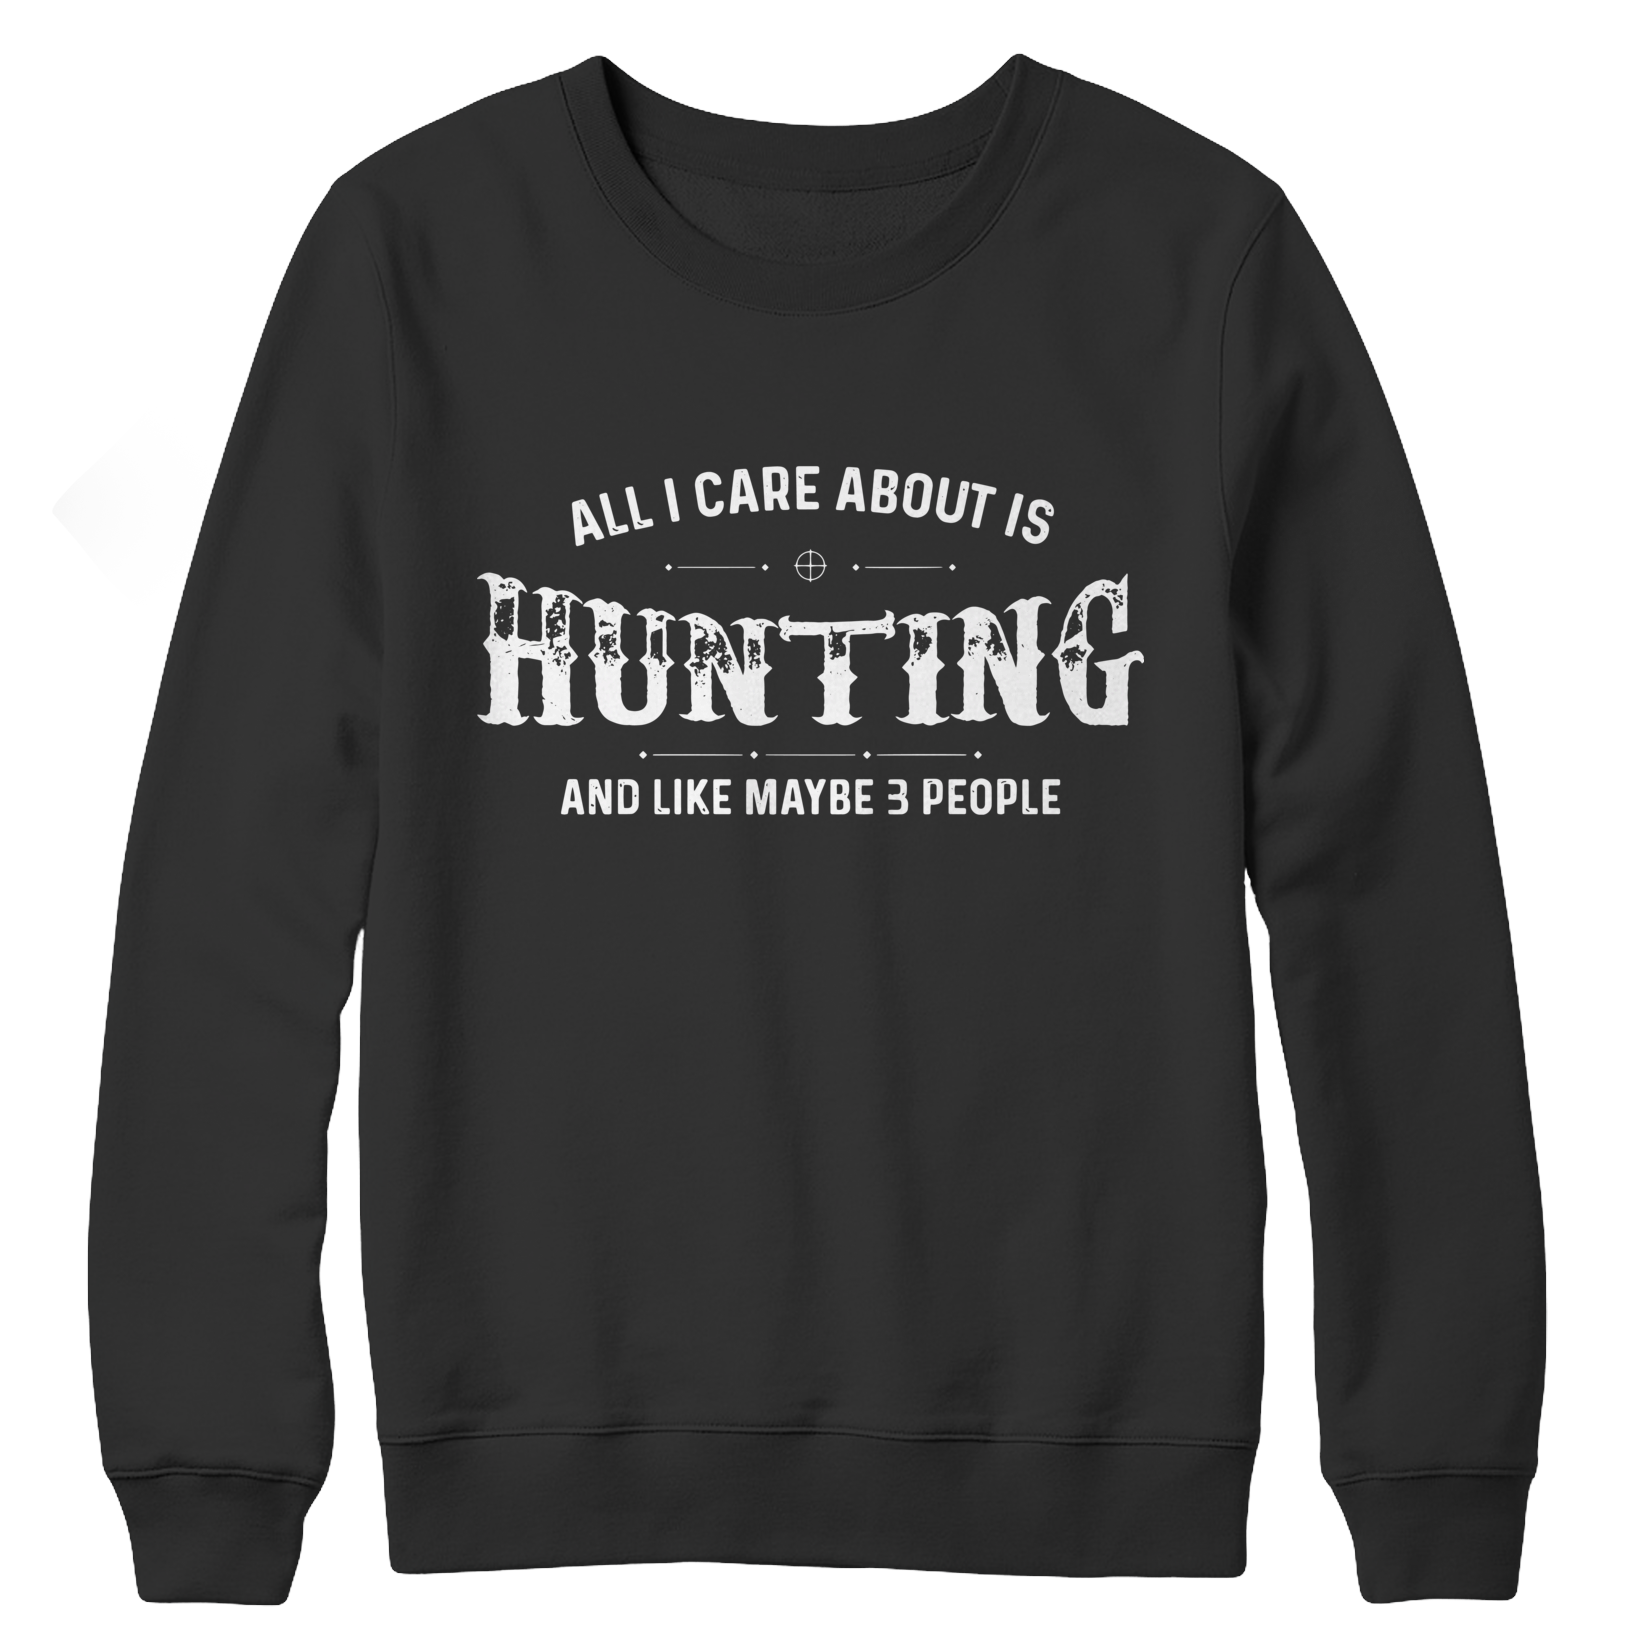 All I Care About Is Hunting